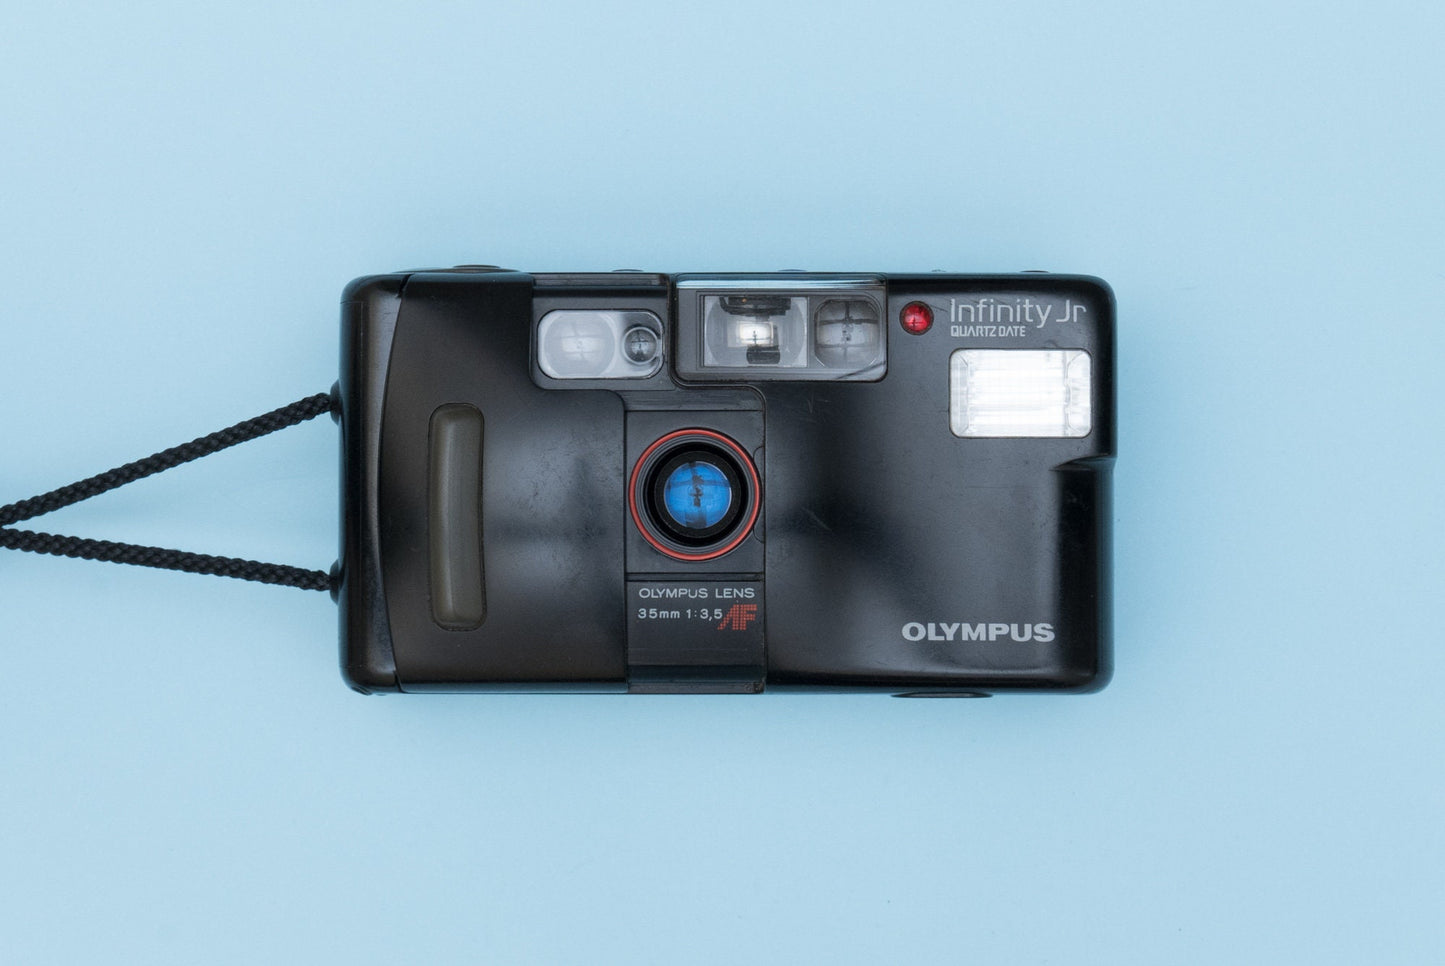 Olympus Infinity Jr AF-10 Compact 35mm Point and Shoot Film Camera